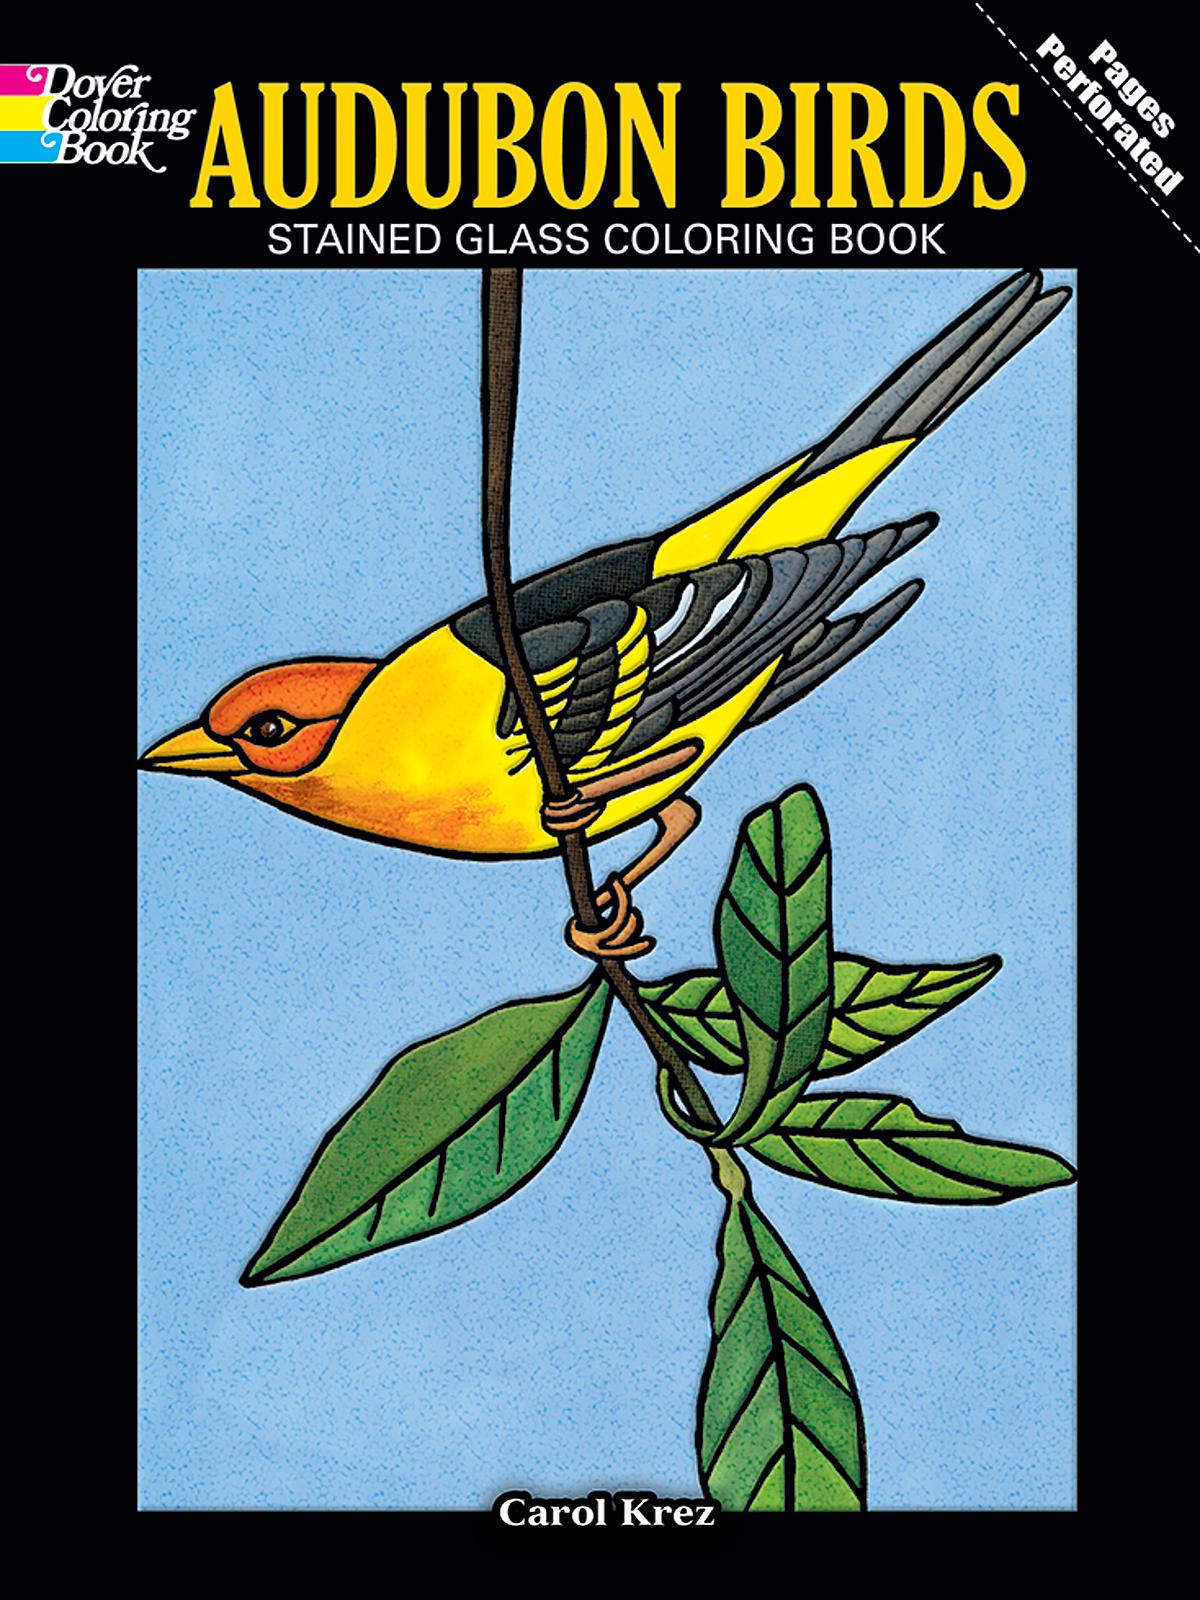 Audubon Birds Stained Glass Coloring Book Audubon Birds Stained Glass Coloring Book